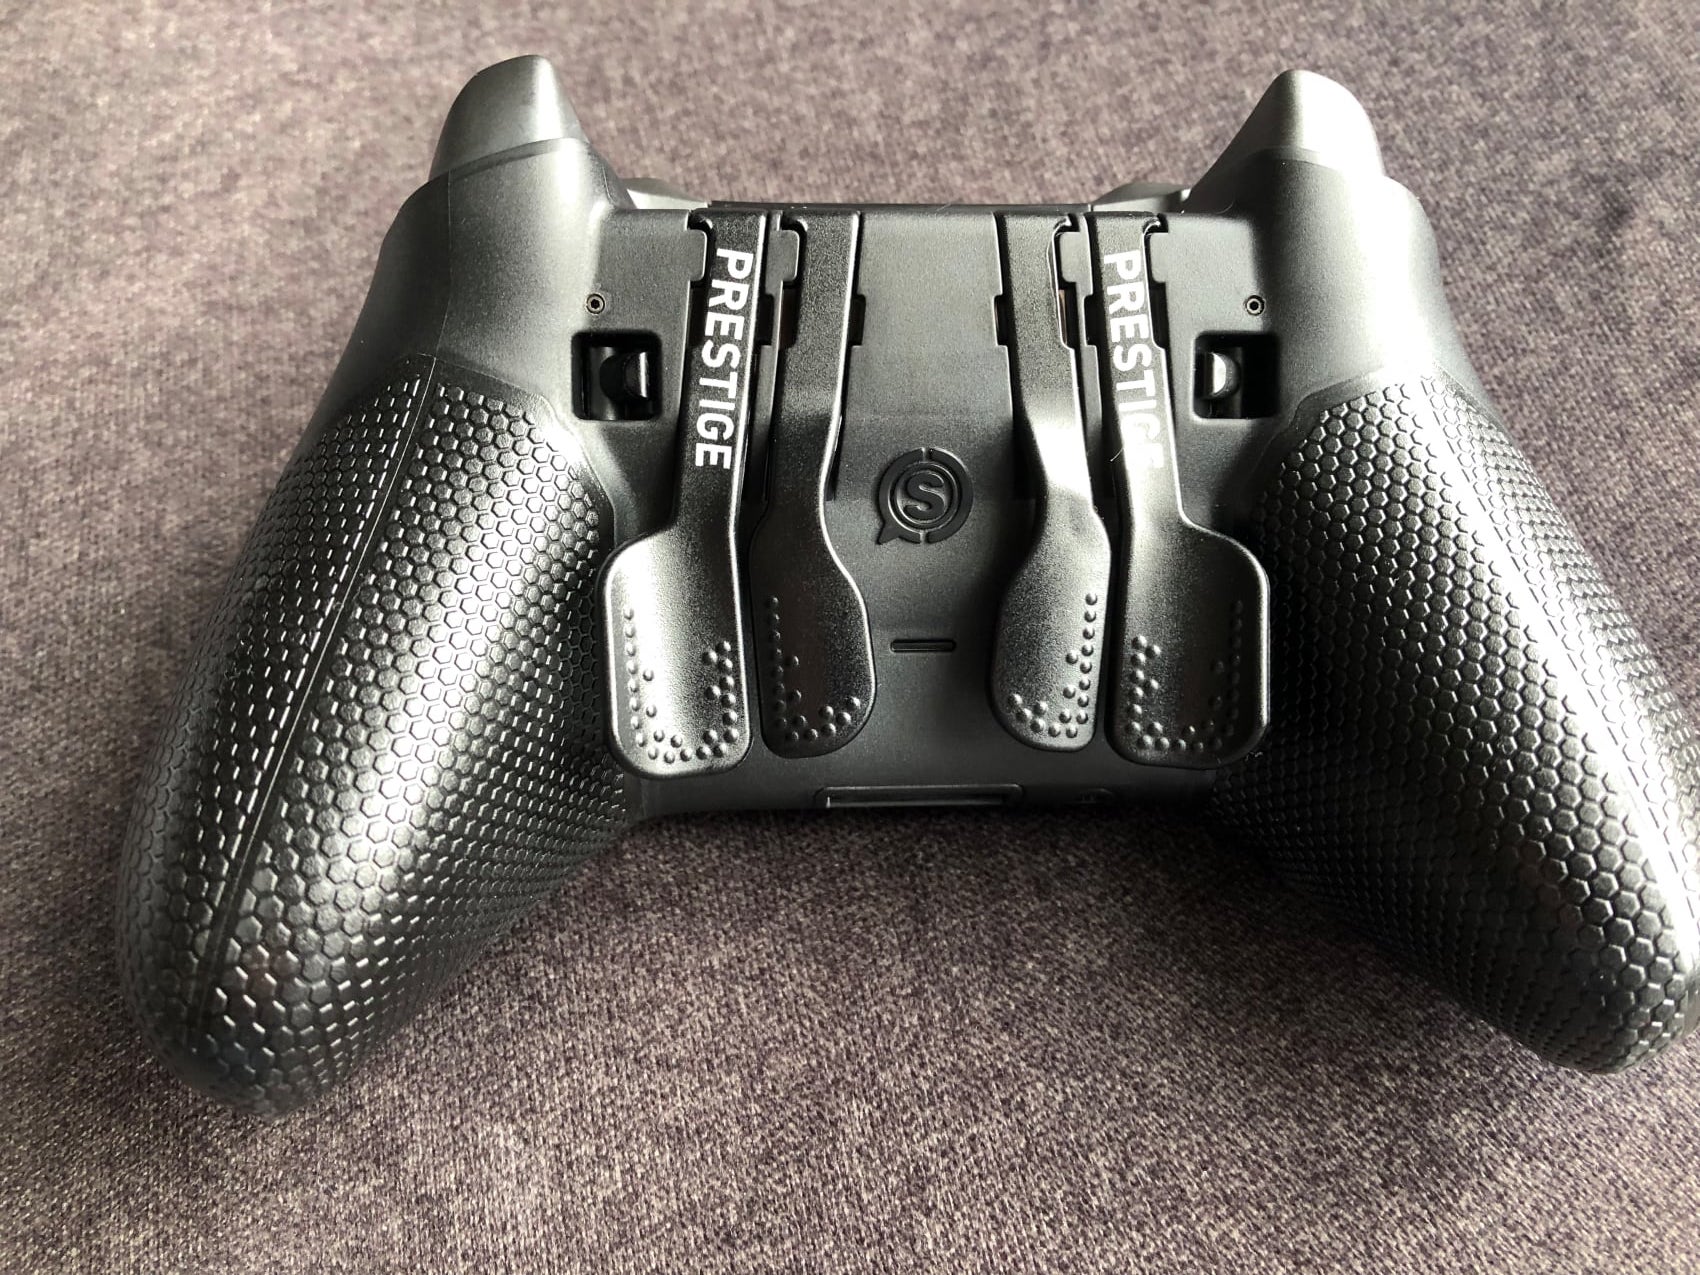 Stikke ud heroin opfindelse Scuf Prestige: An Xbox One Pro Gaming Controller That Fails to Compete |  Digital Trends